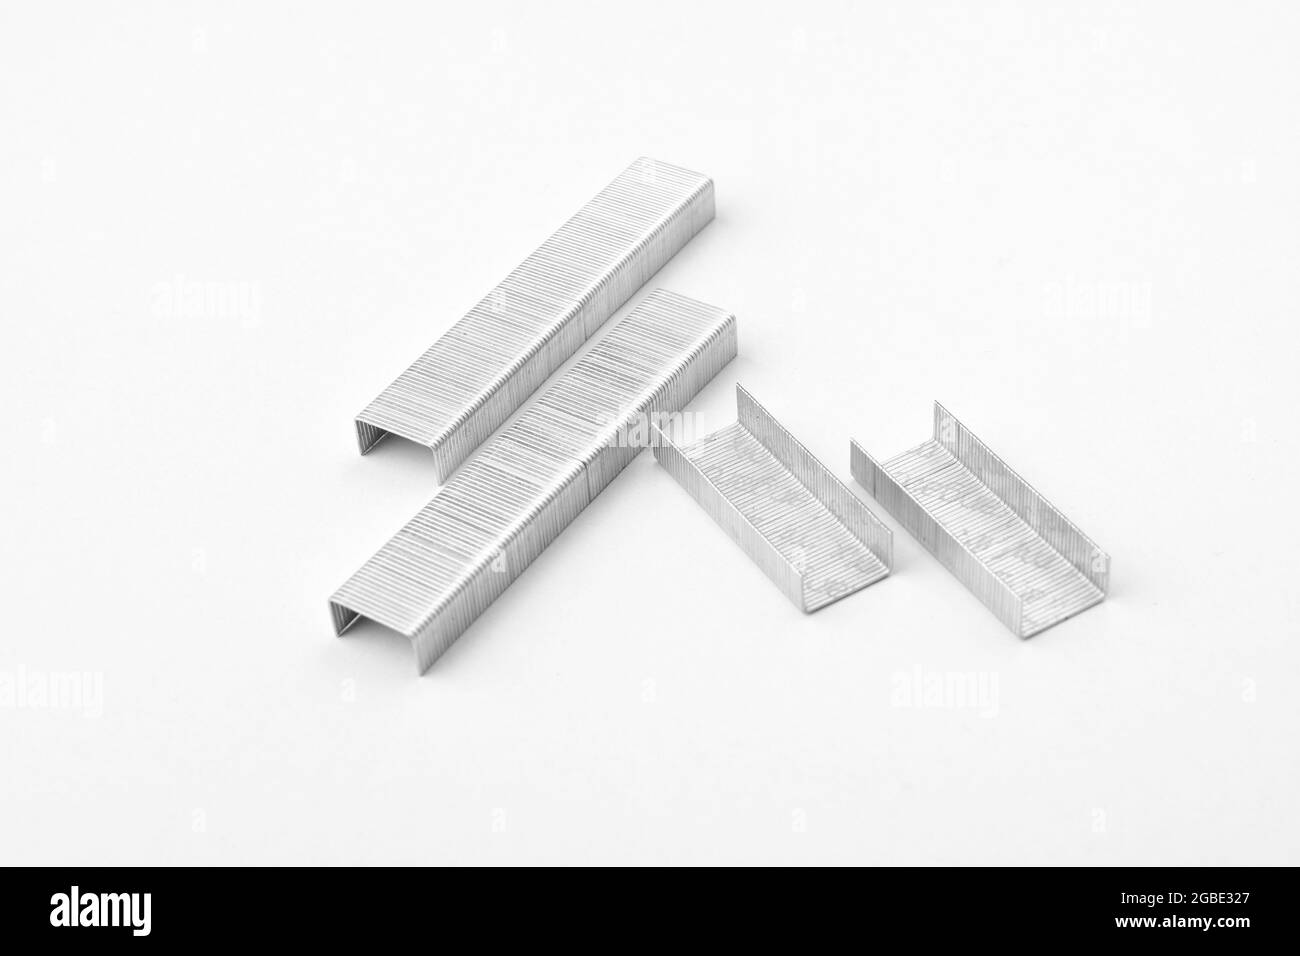 Stapler Pins Isolated On White background With Clipping Path Stock Photo